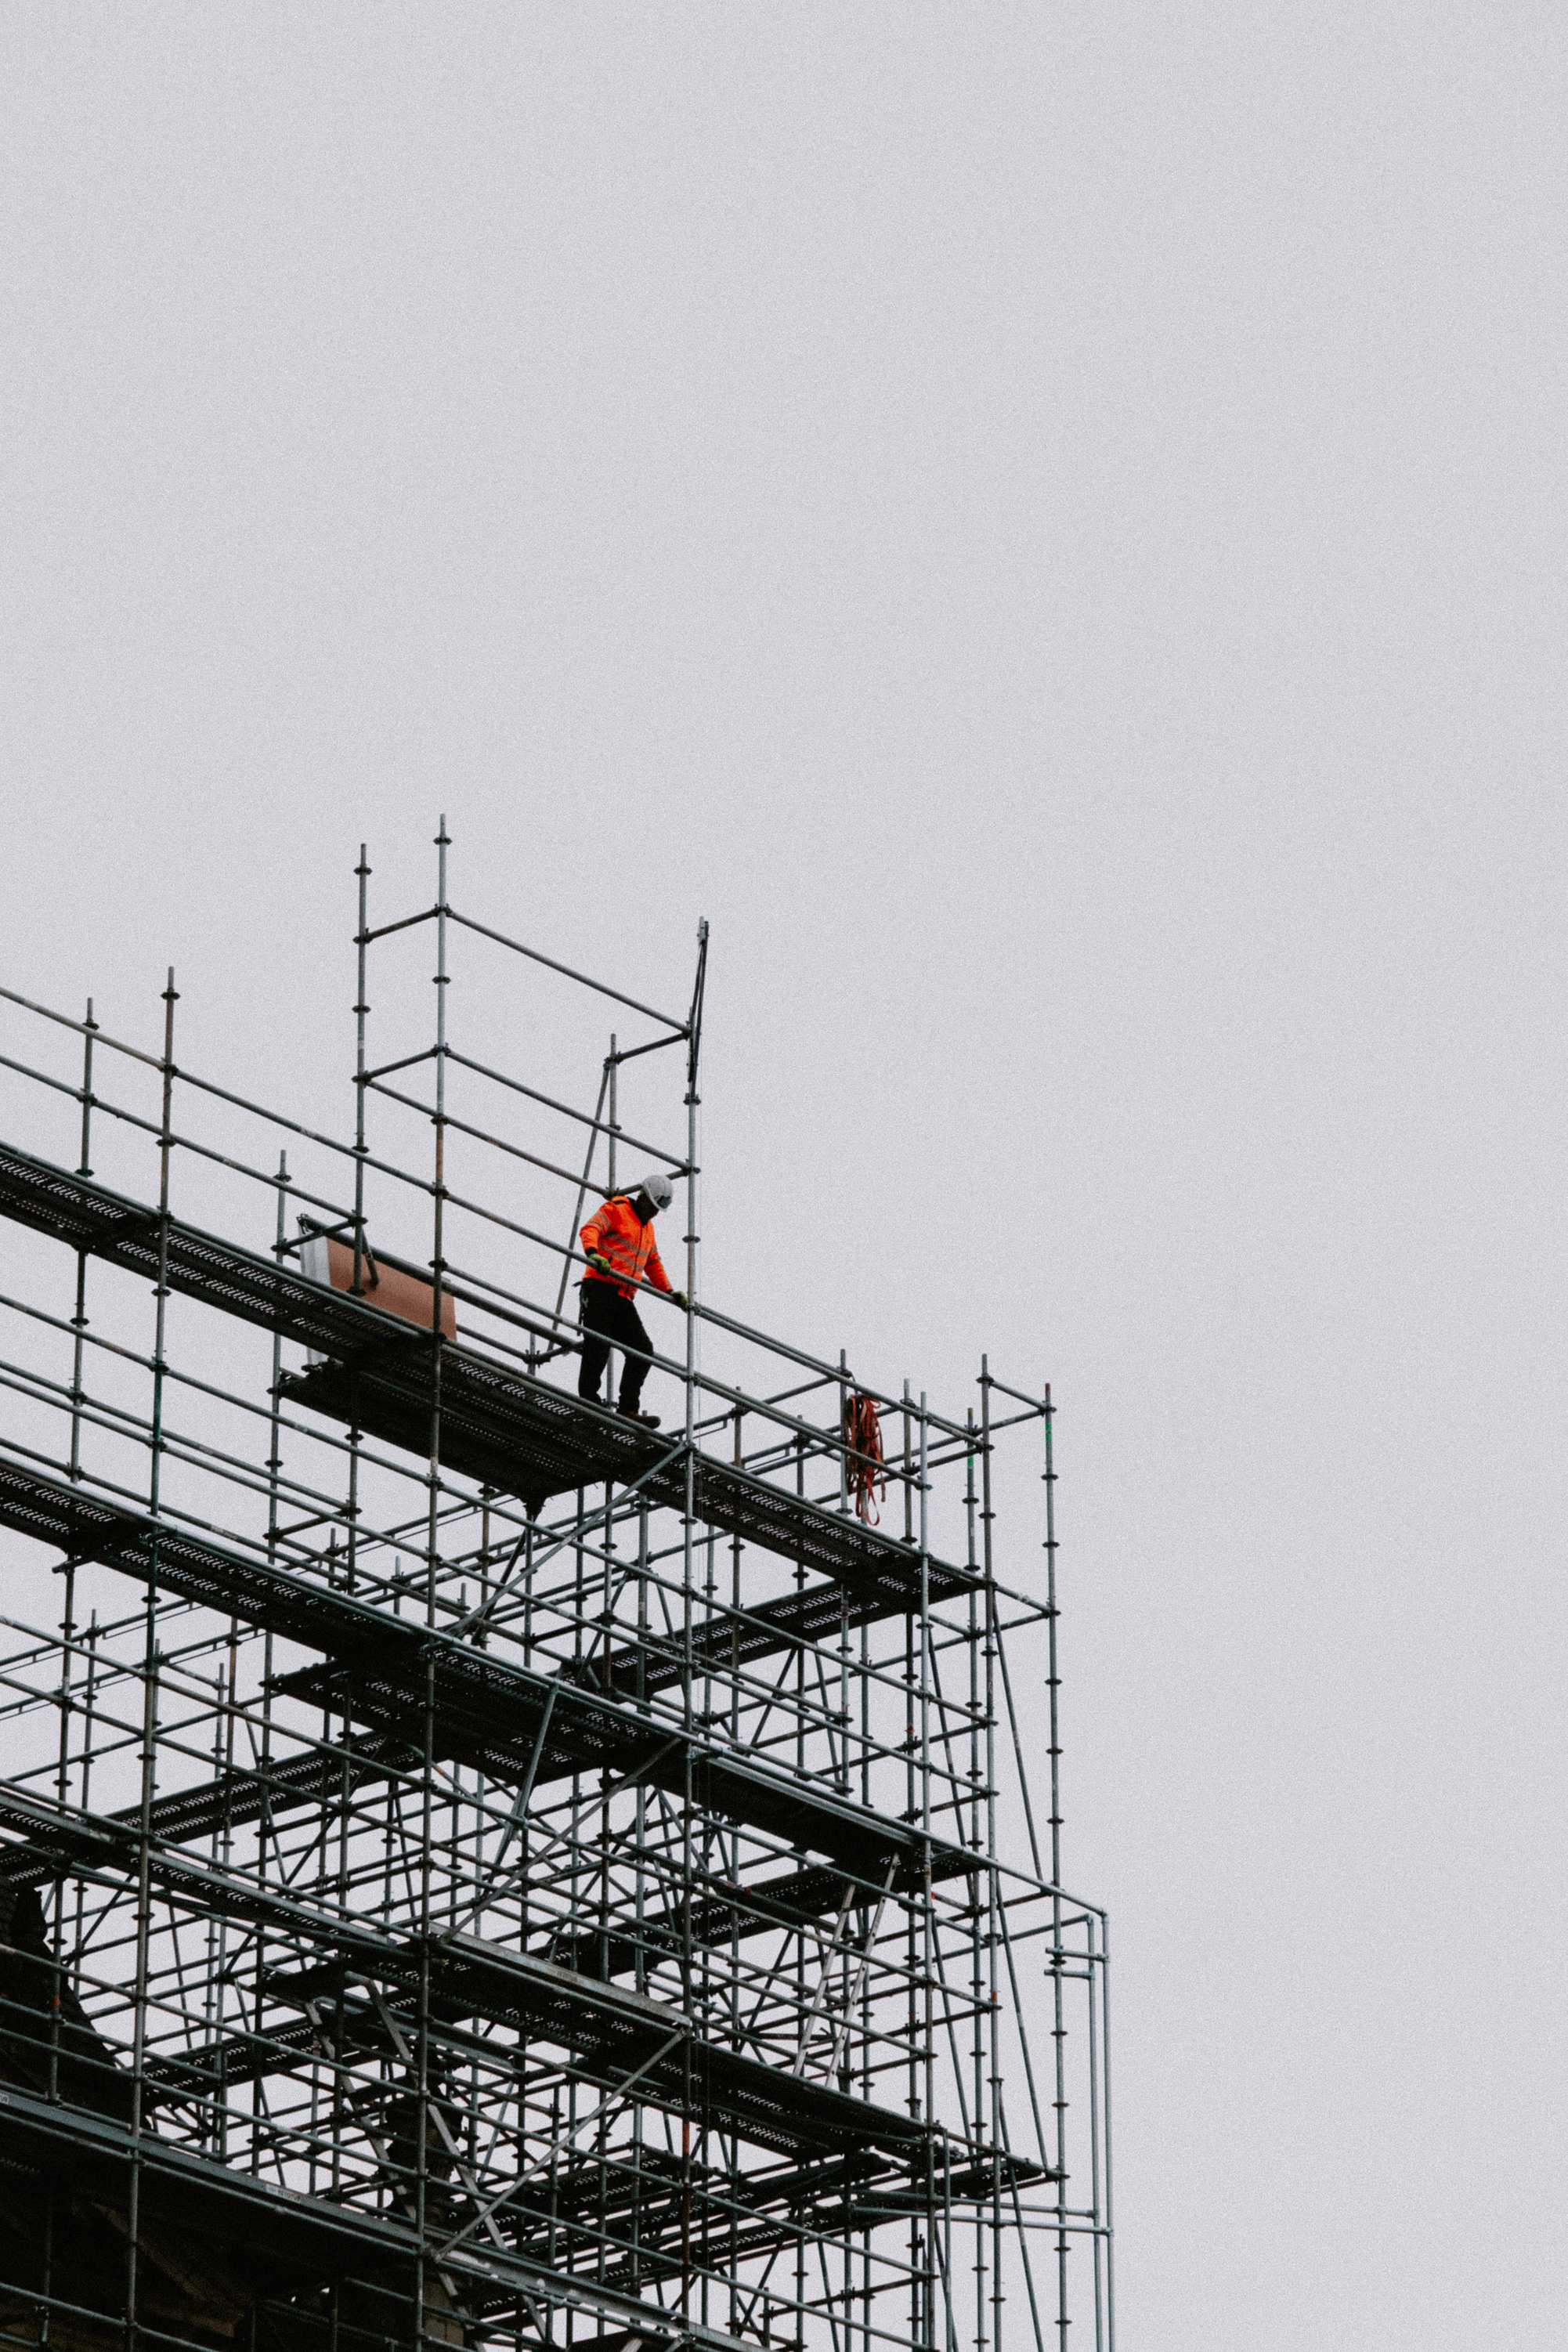 Photo of a Construction Worker on Building Under Construction